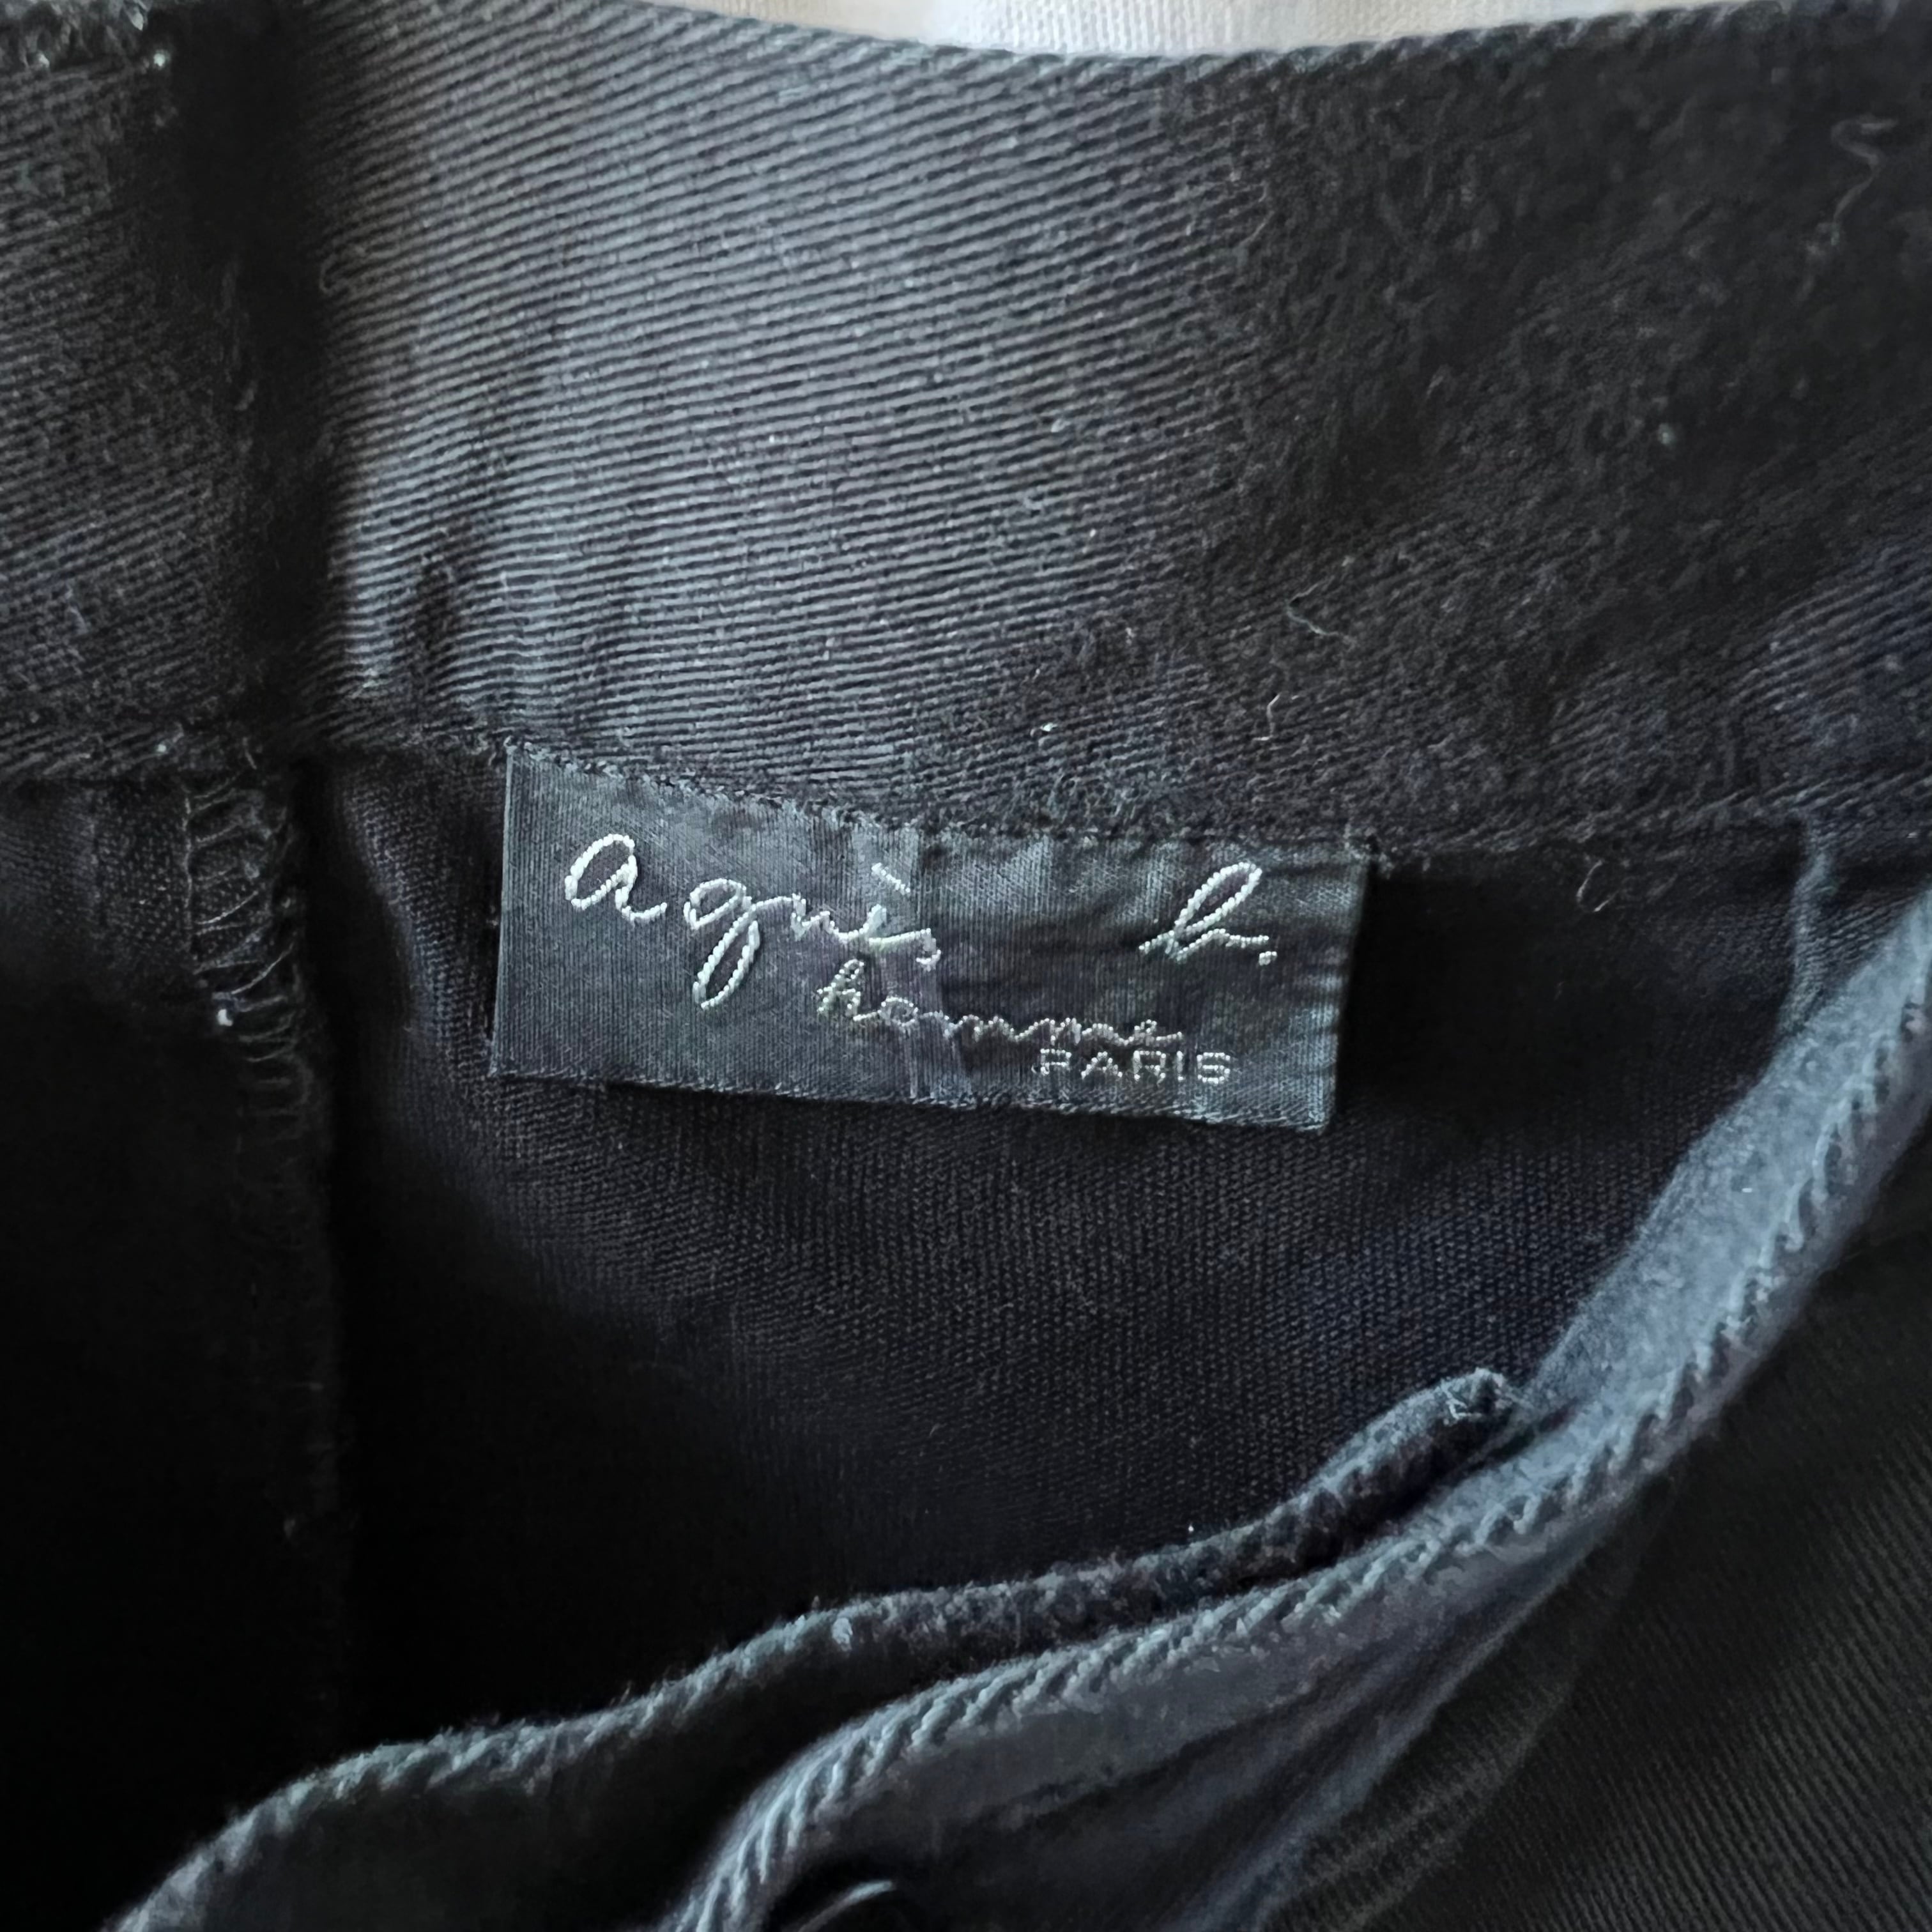 90s “agnes b.” made in france black streat cotton pants